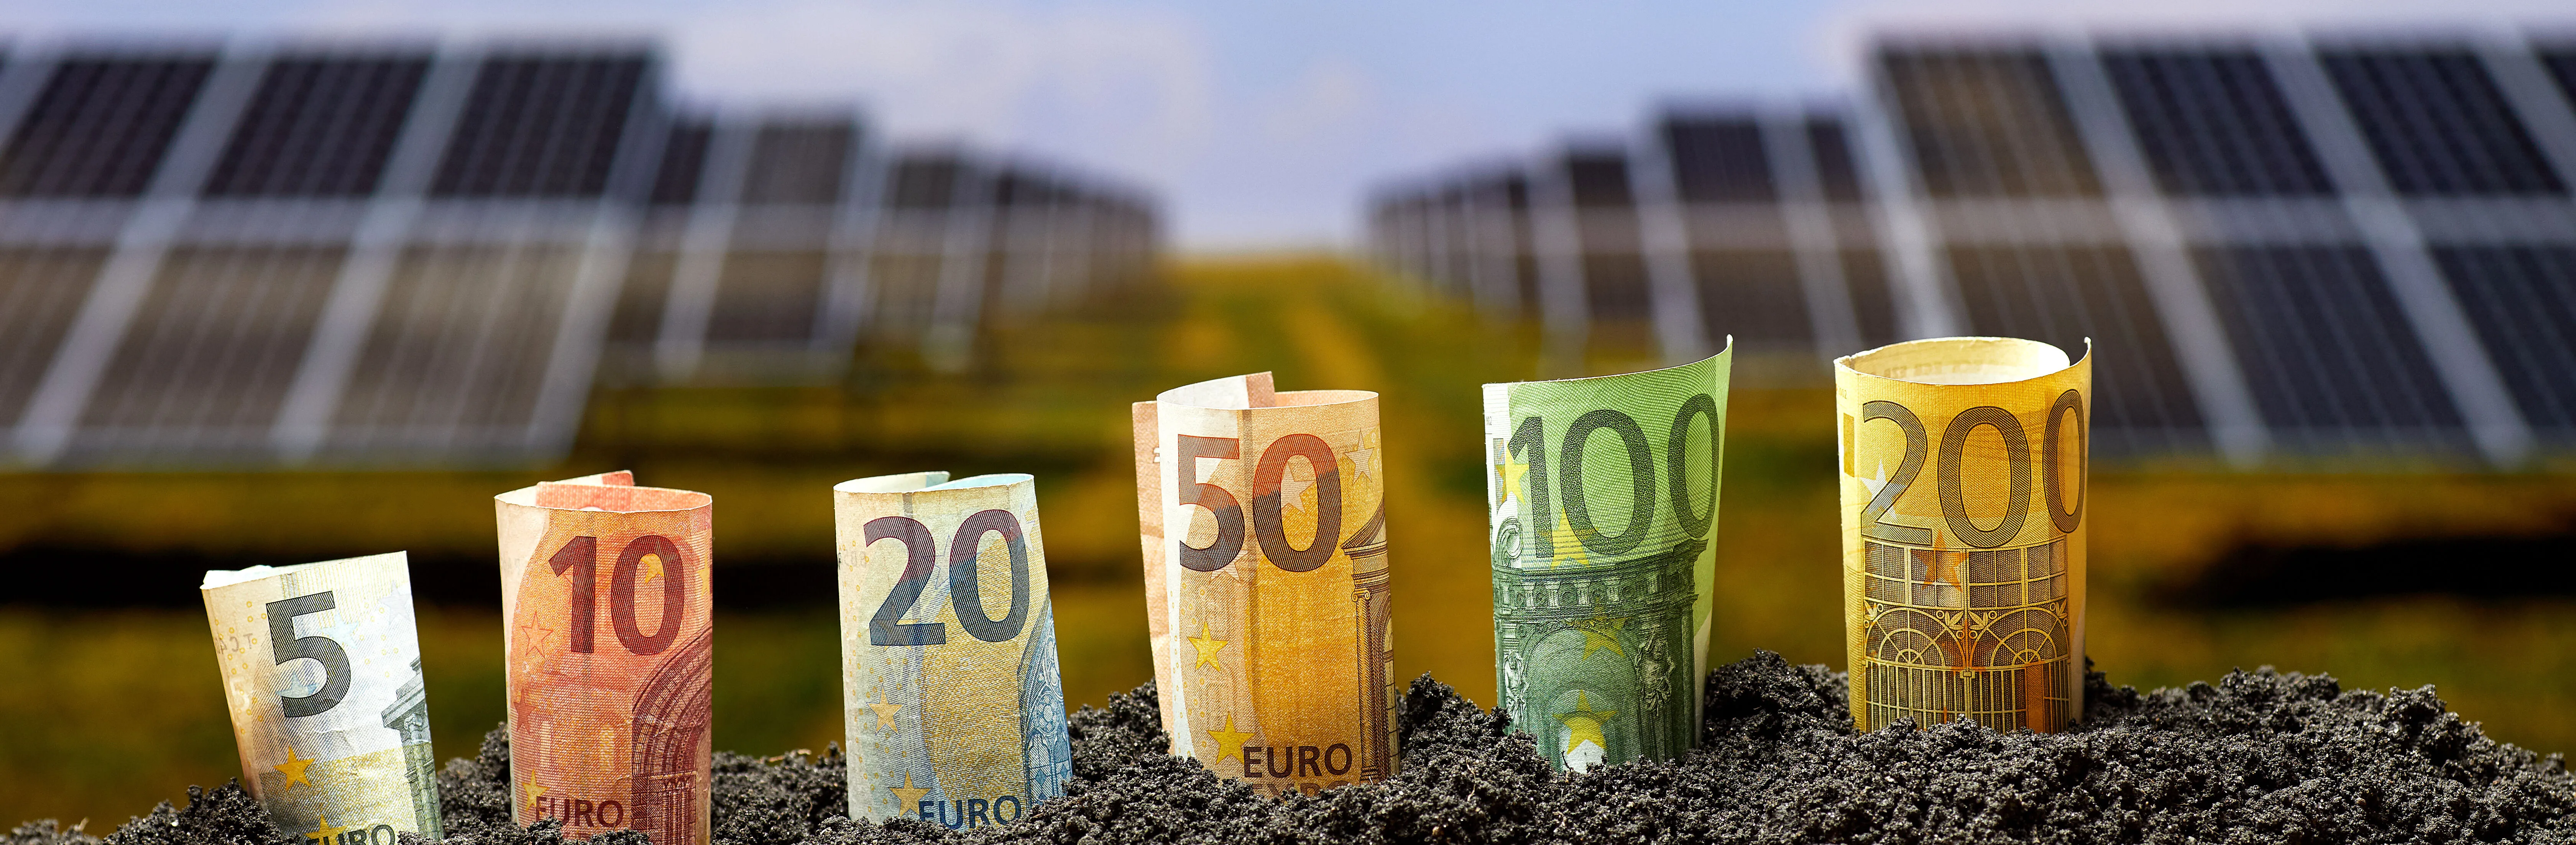 Euro banknote and solar panels on background, alternative electricity source. Sustainable resources concept.jpg